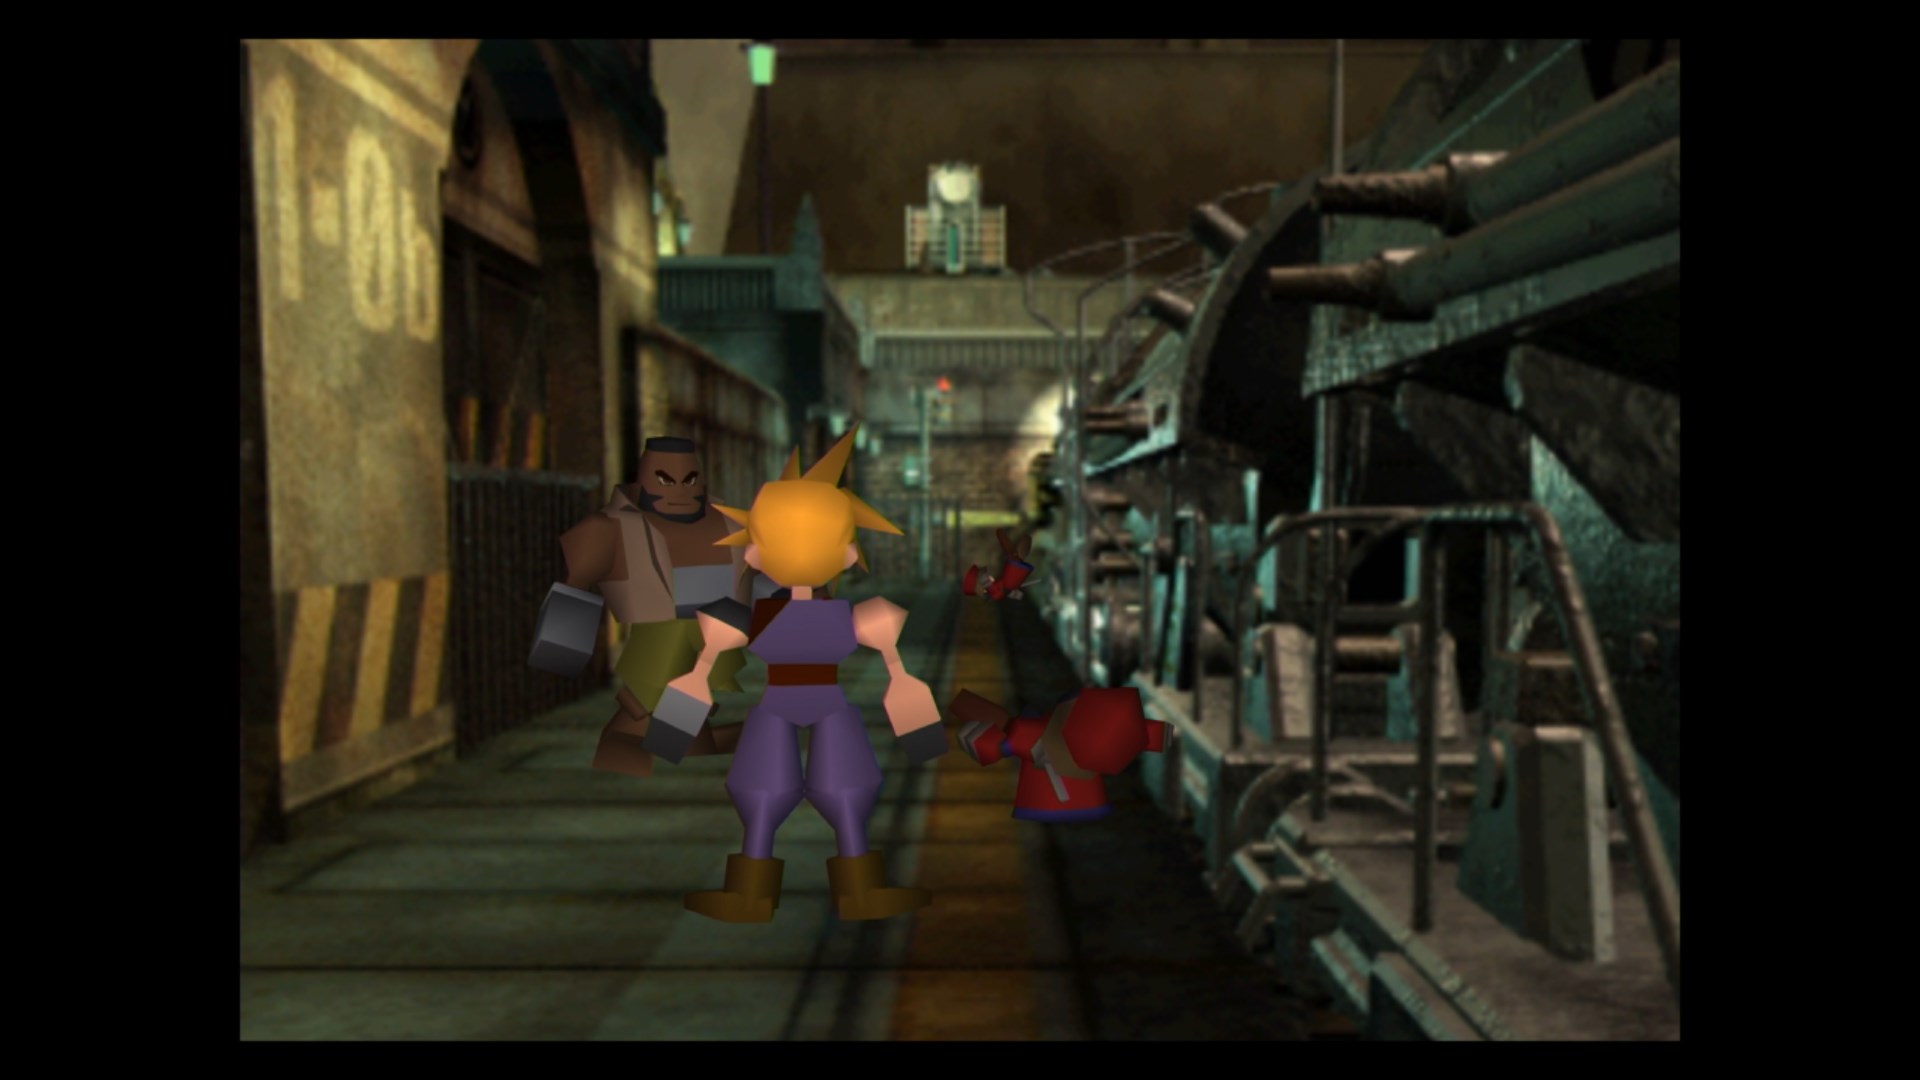 Looking Back to 1997 and the Polygonal Perfection of Final Fantasy VII